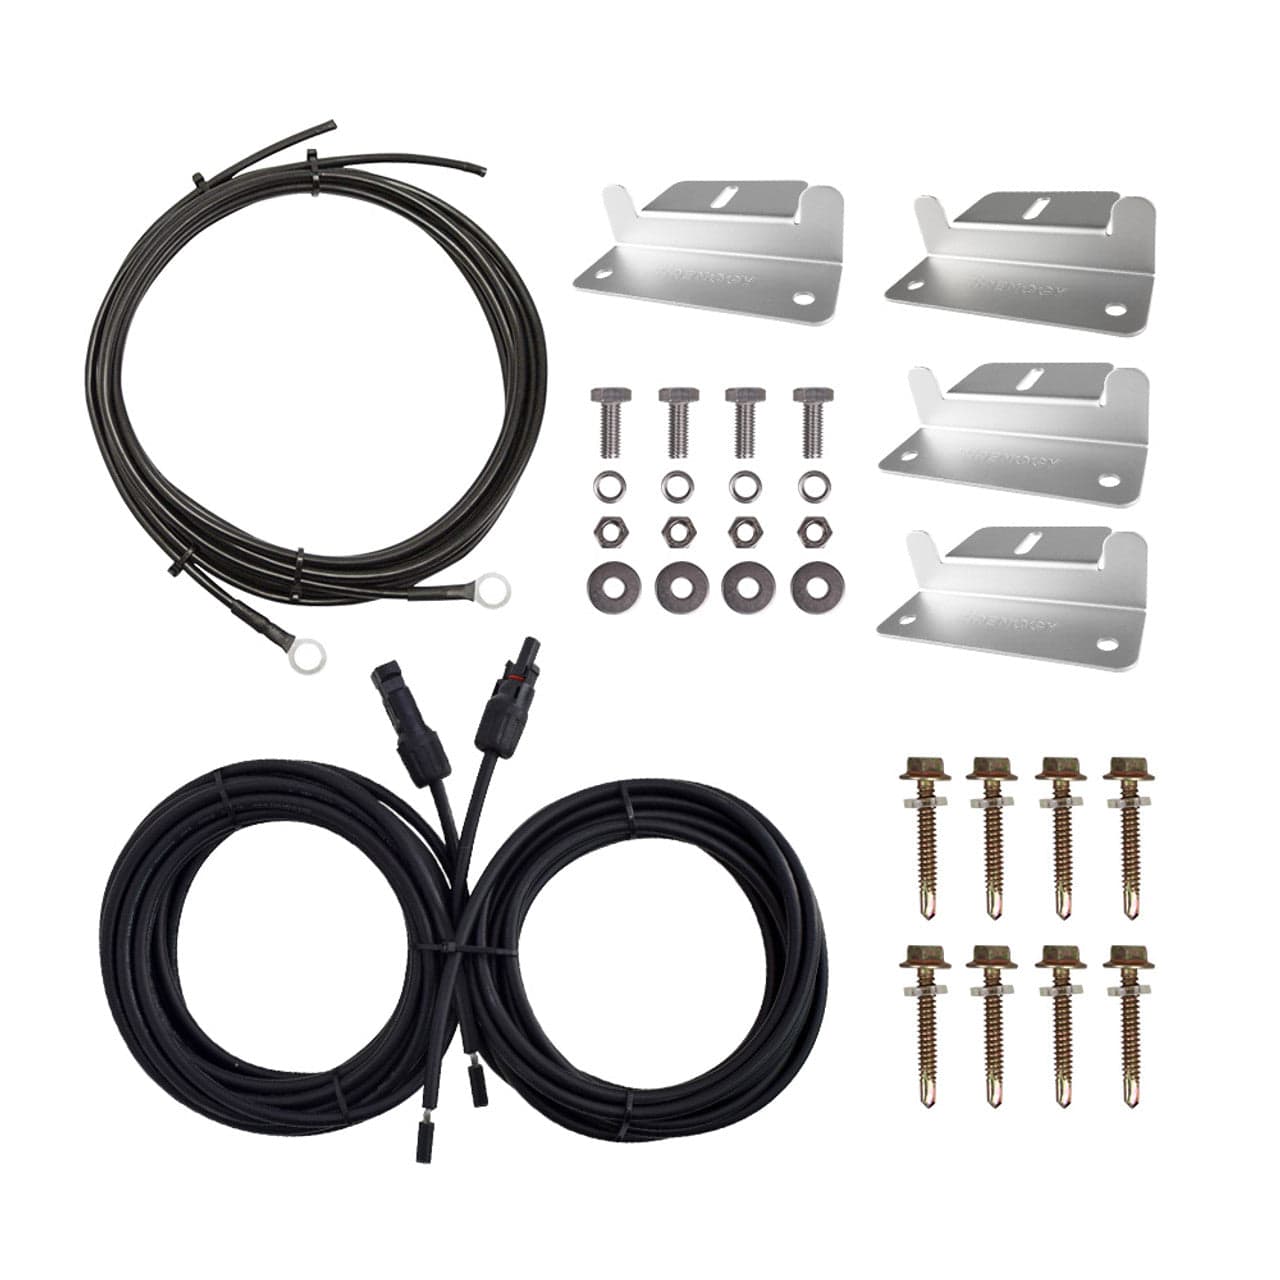 Renogy Accessories and Cables Kit for 100/200/400 W module Renogy Solar Wiring Cables & Connectors